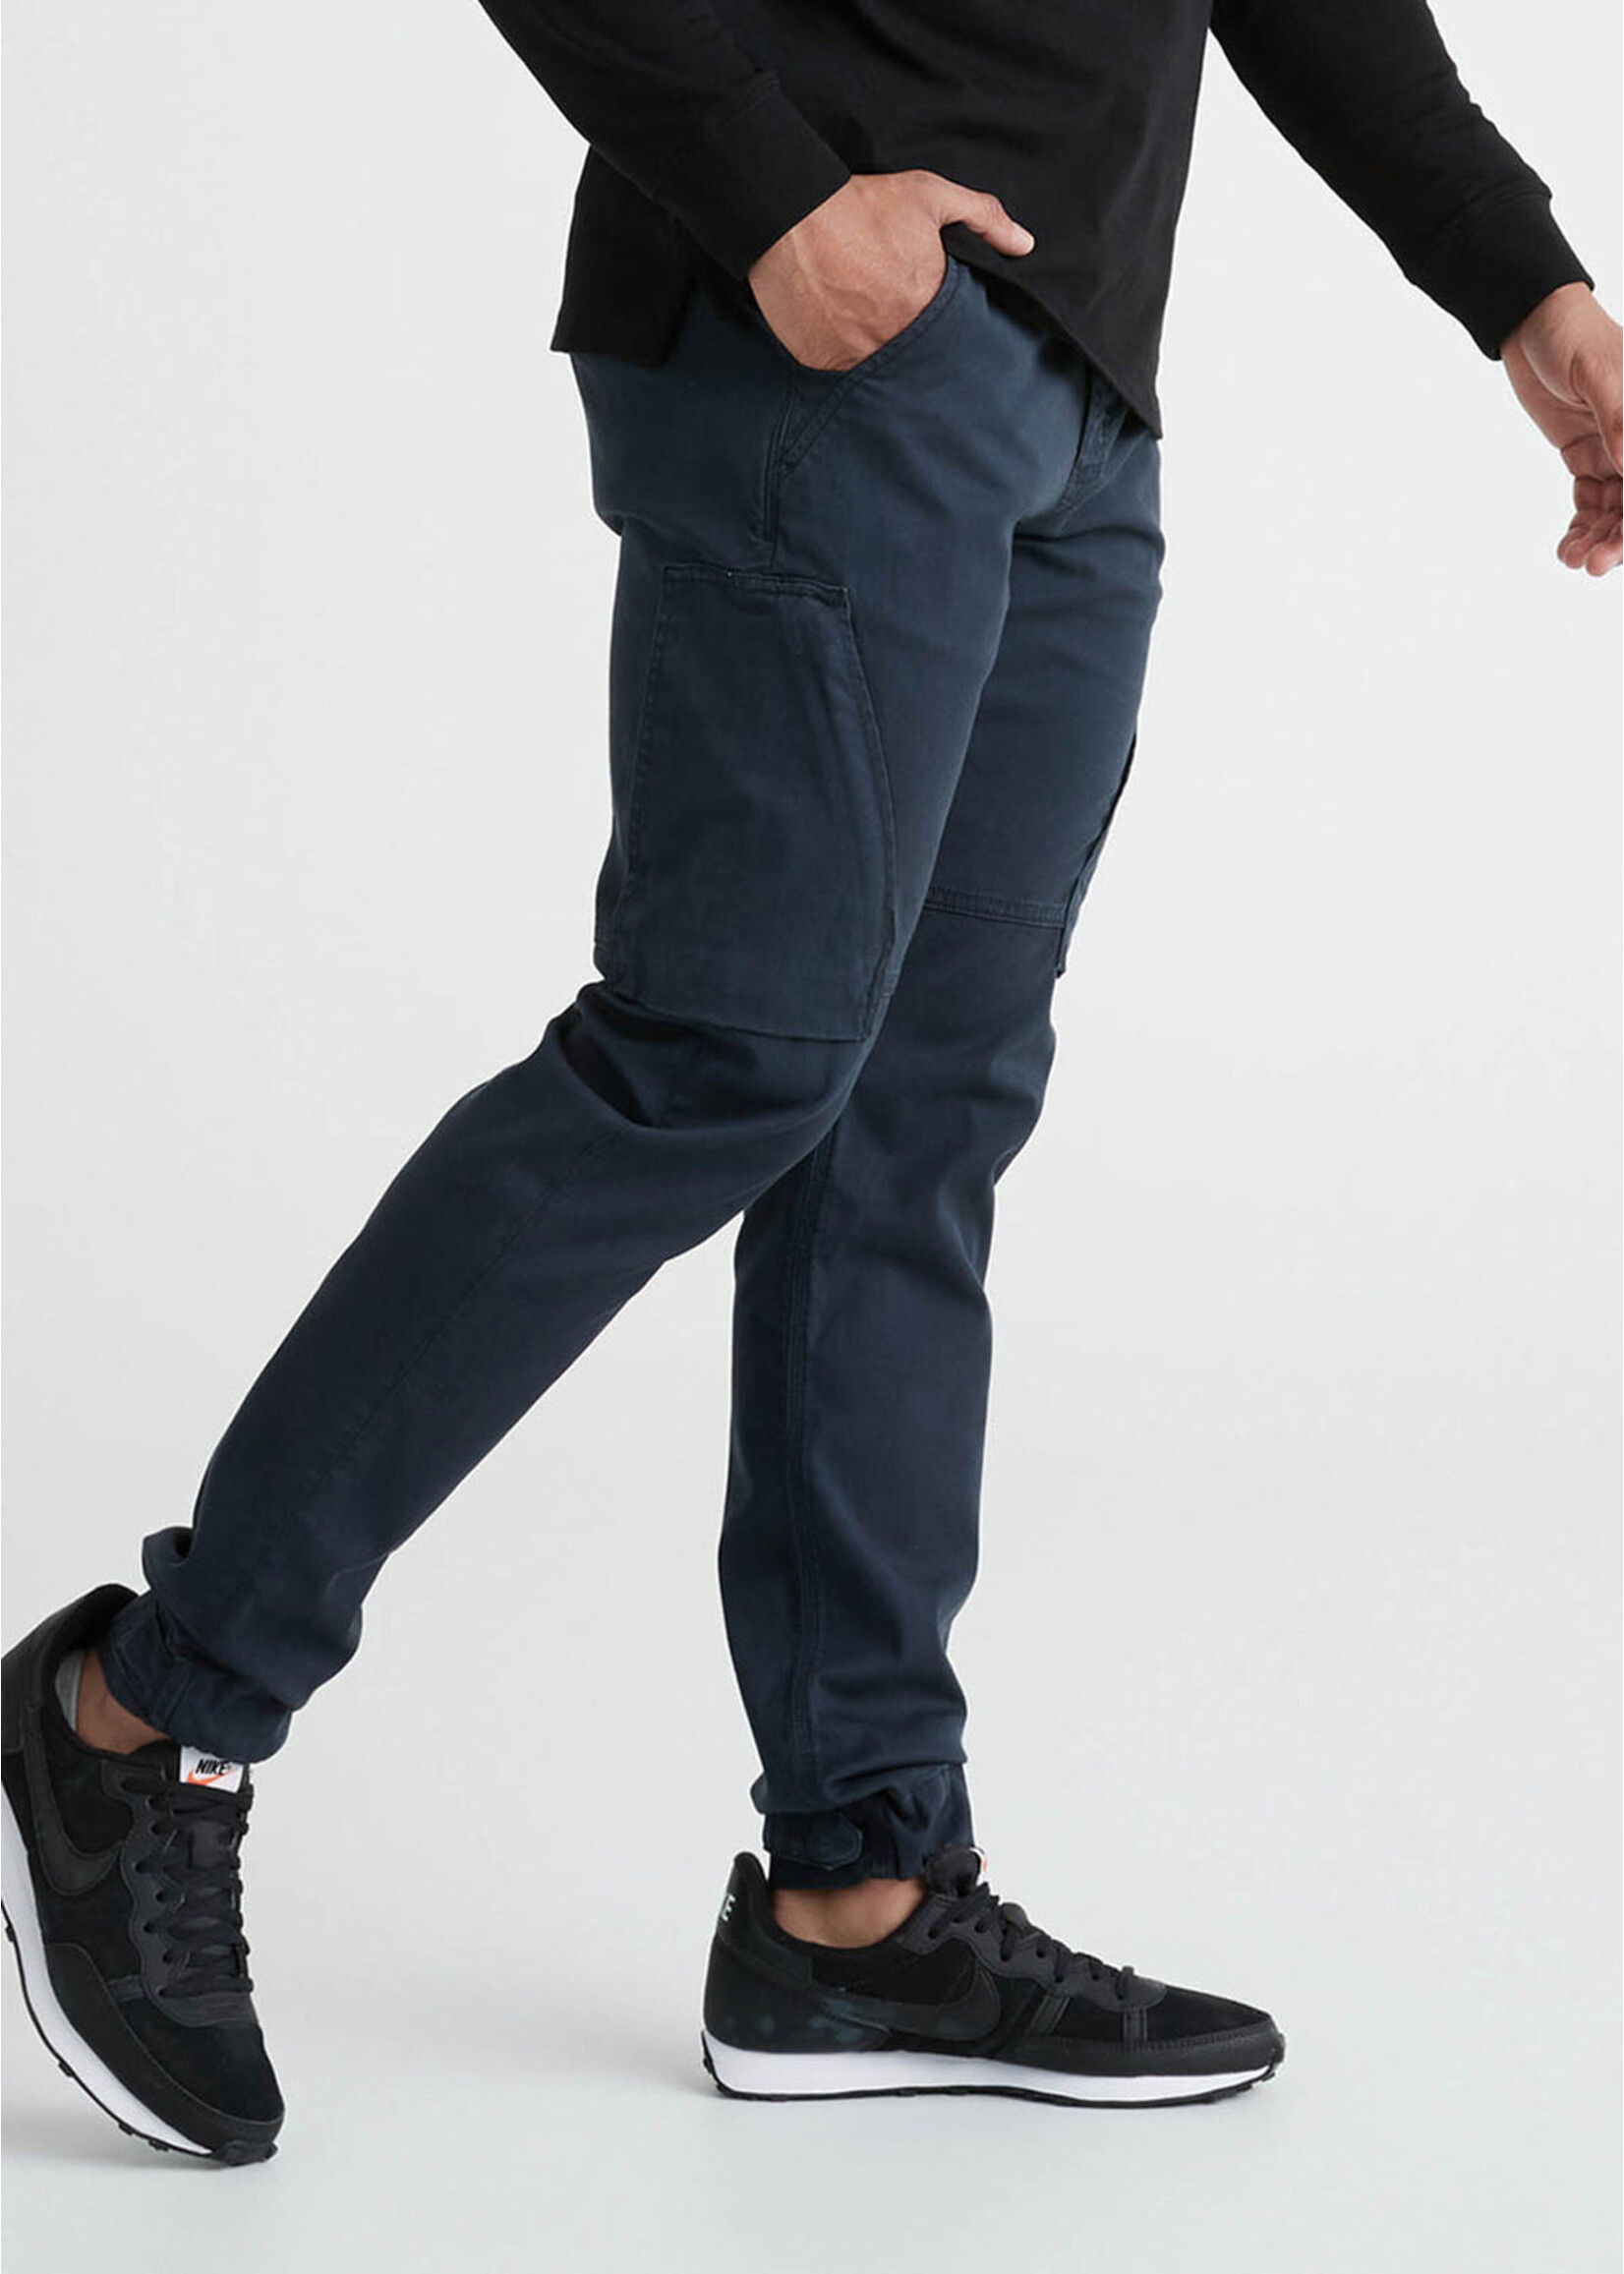 DUER Live Free Adventure Pant - Navy